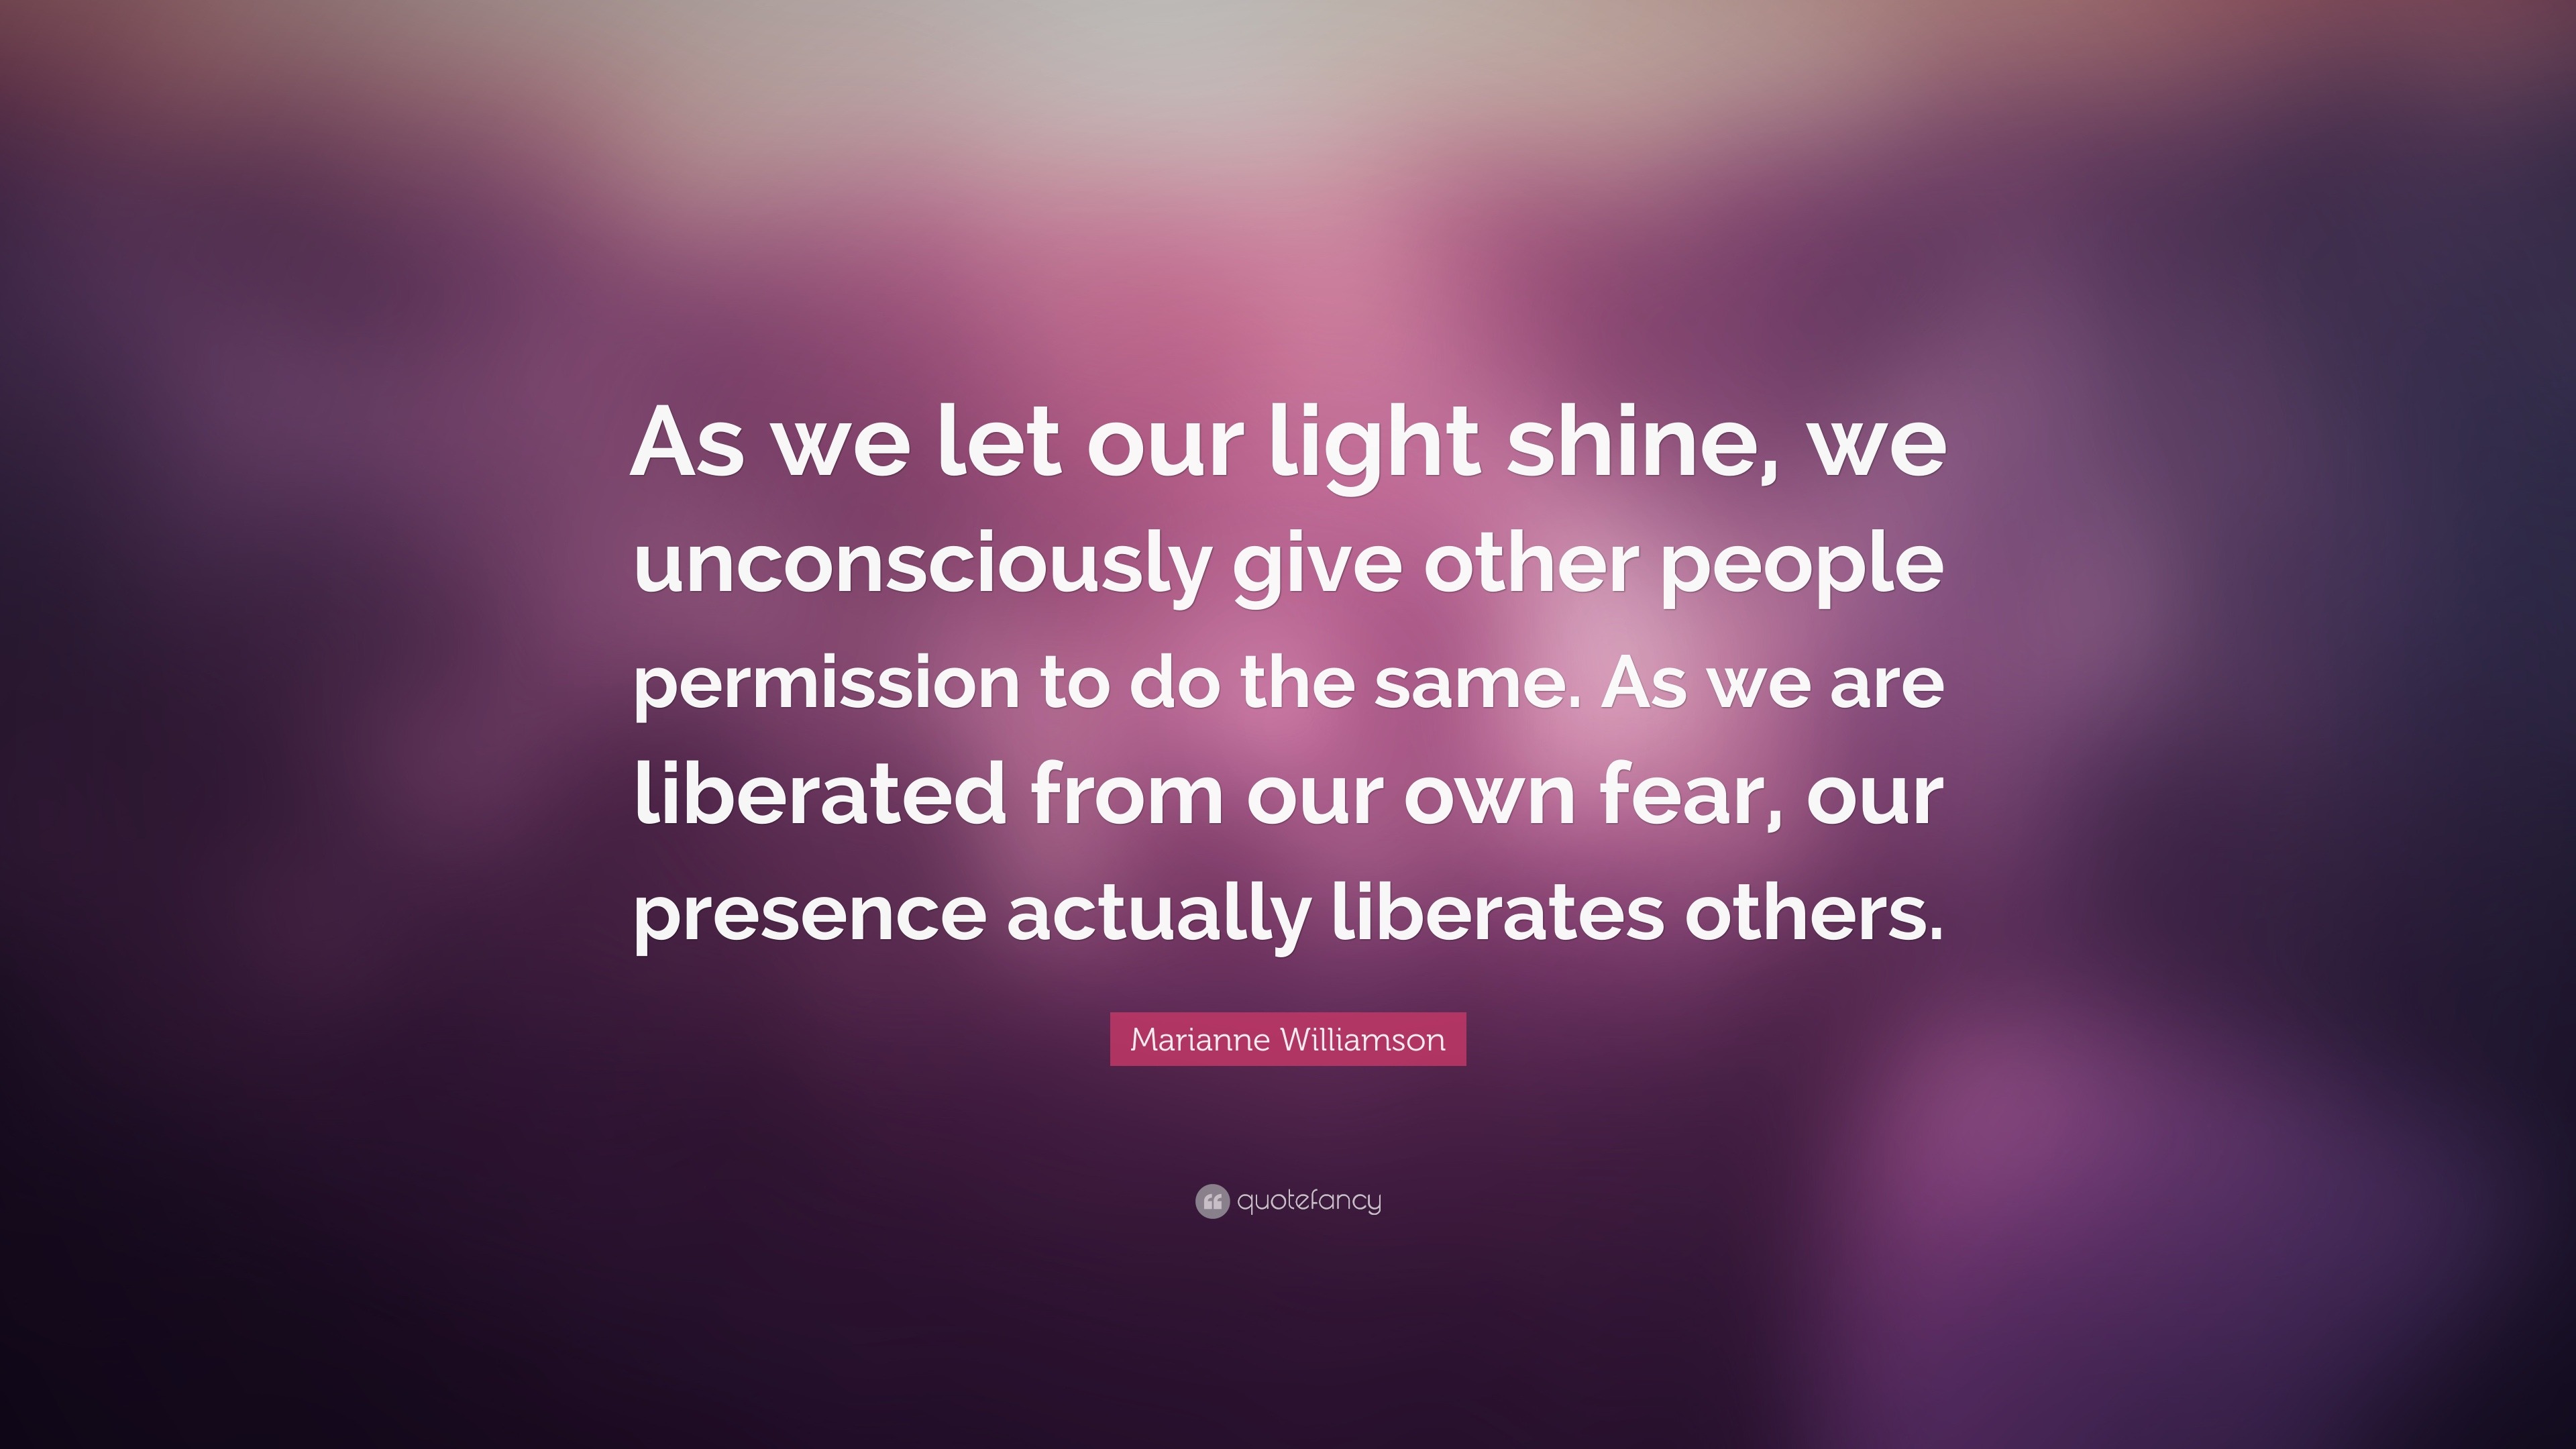 Marianne Williamson Quote: “As we let our light shine, we